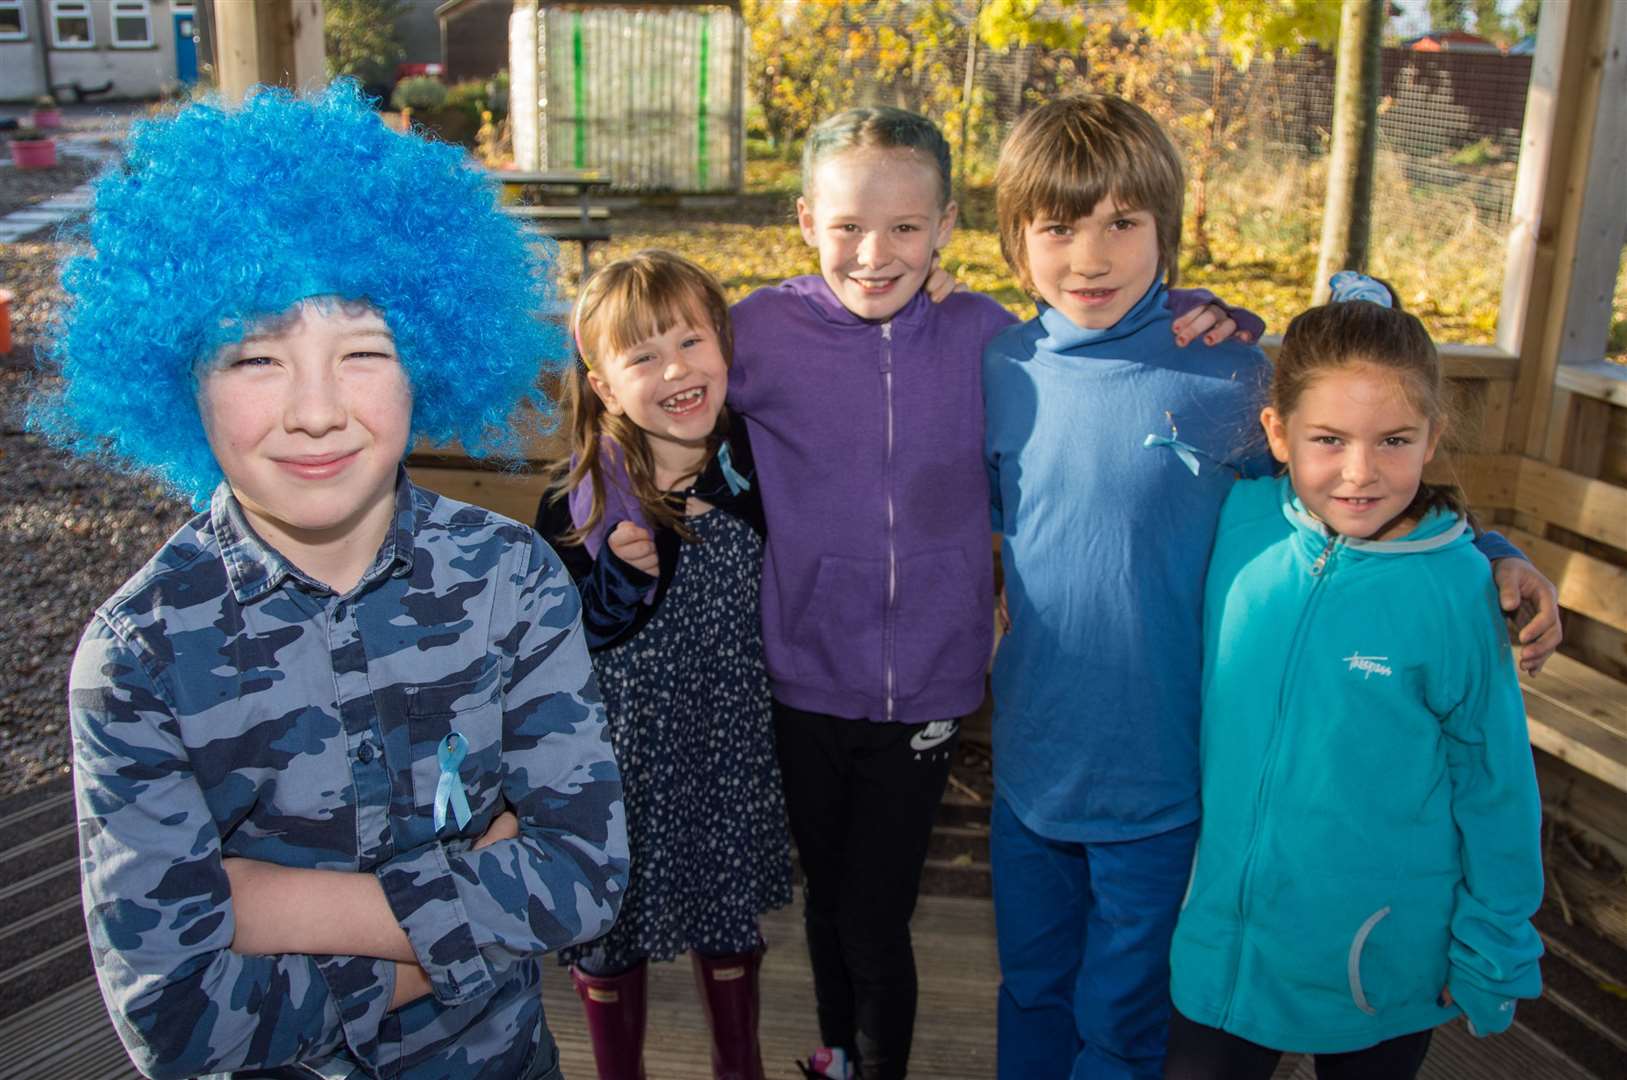 Alves primary pupils from left Finlay McConnachie, Izzy Blackman, Molly Russell, Fionn Ralph and Layla Rodriguez presented a dyslexia presentation to the school...All pupils also dressed in blue for Dyslexia Awareness Week...Picture: Becky Saunderson...